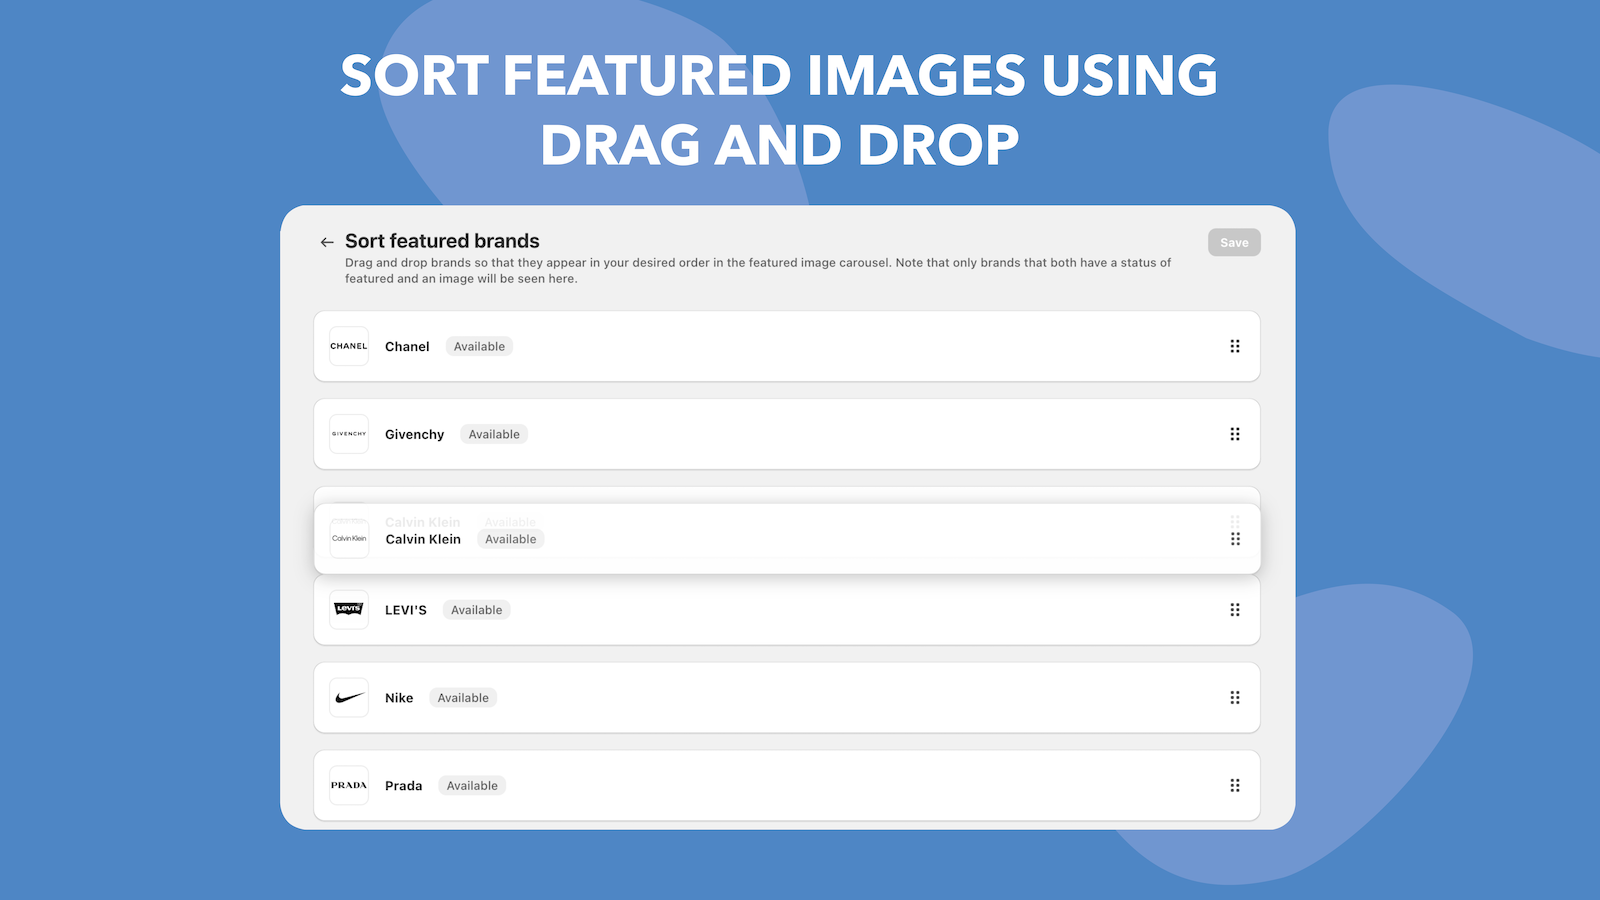 Sort featured images using drag and drop